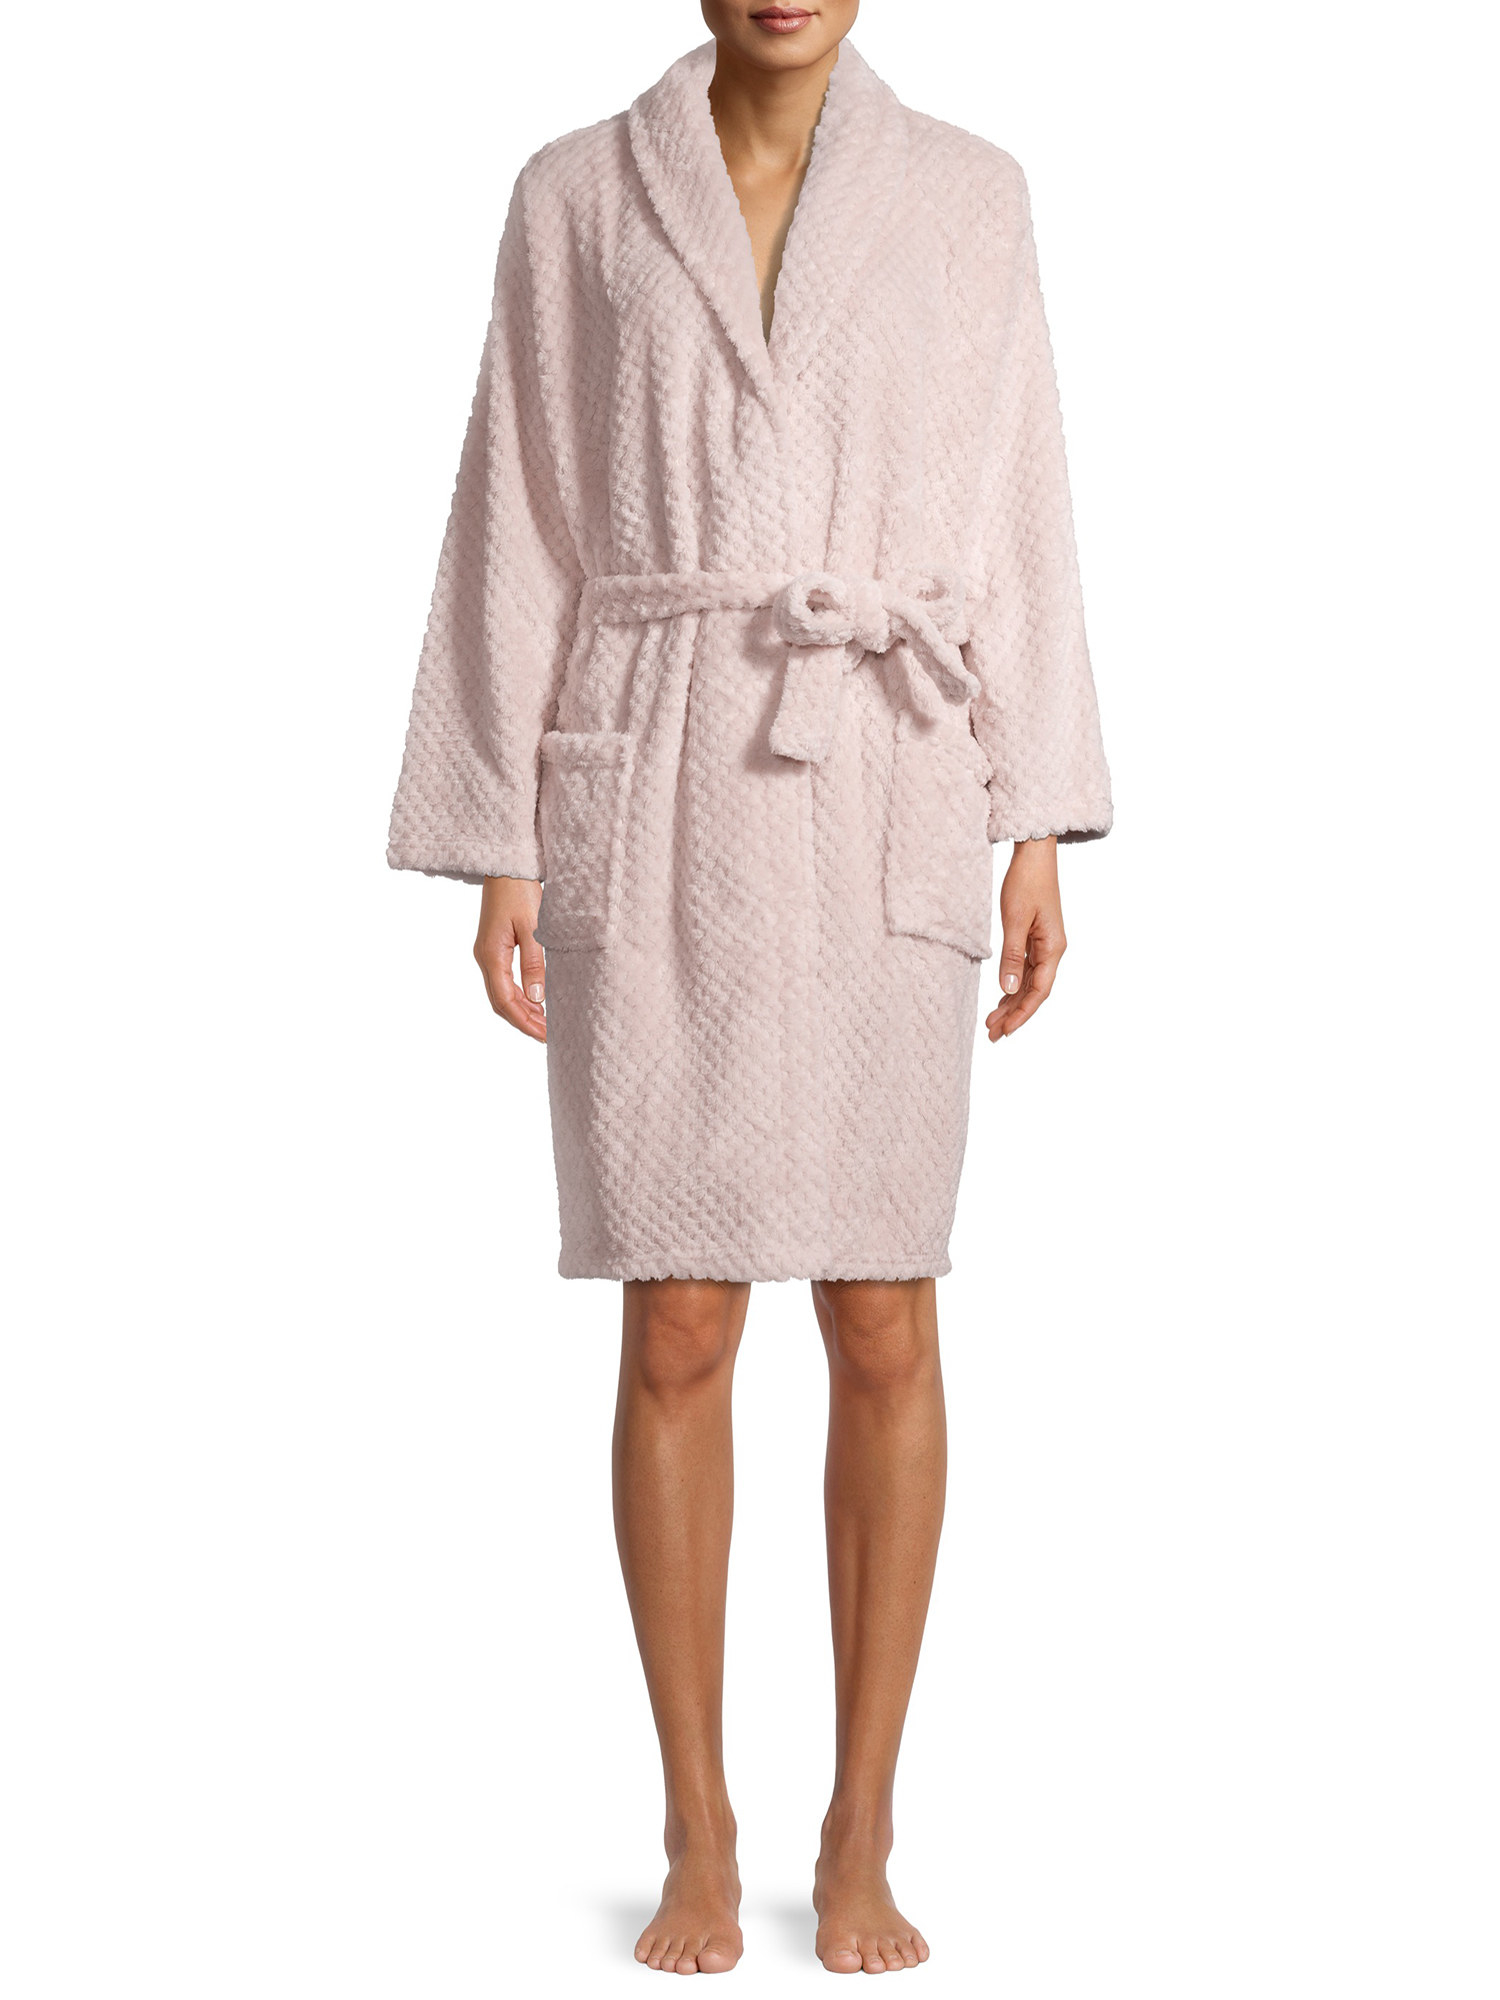 A model wearing the pink plush robe